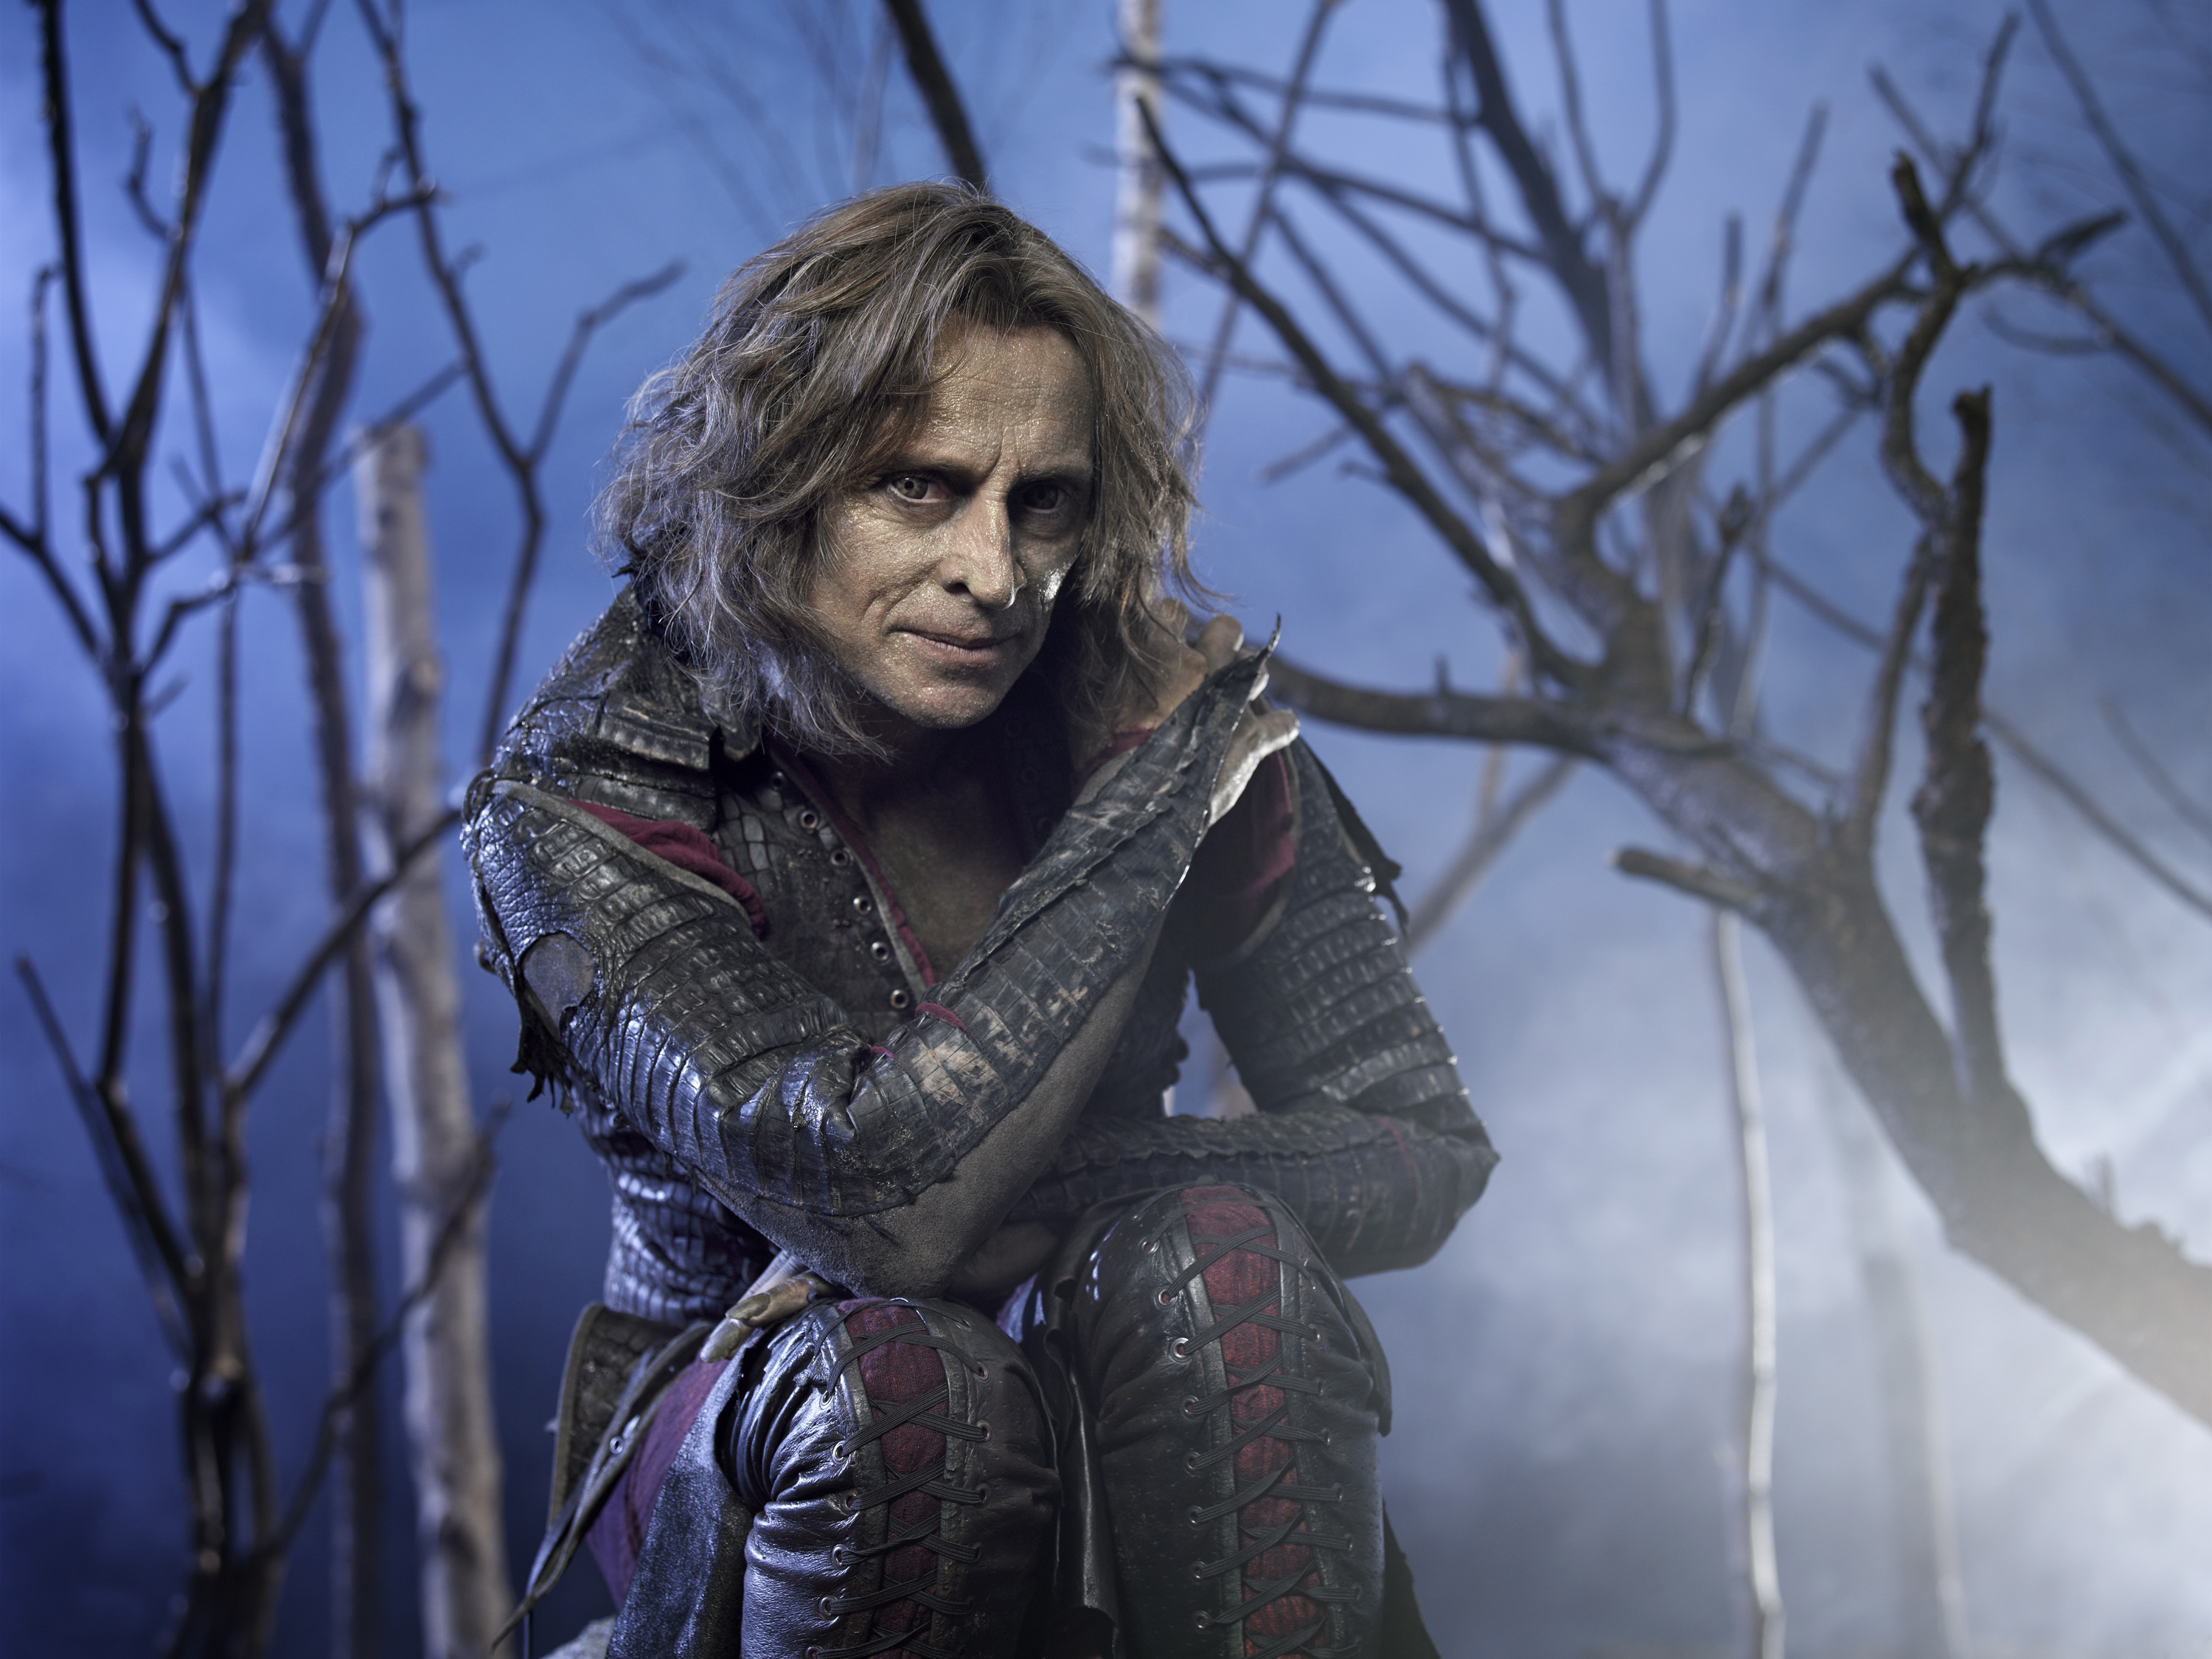 Fairy Tale Fantasy Once Upon A Time Robert Carlyle Rumpelstiltskin Wizard 3000x2250